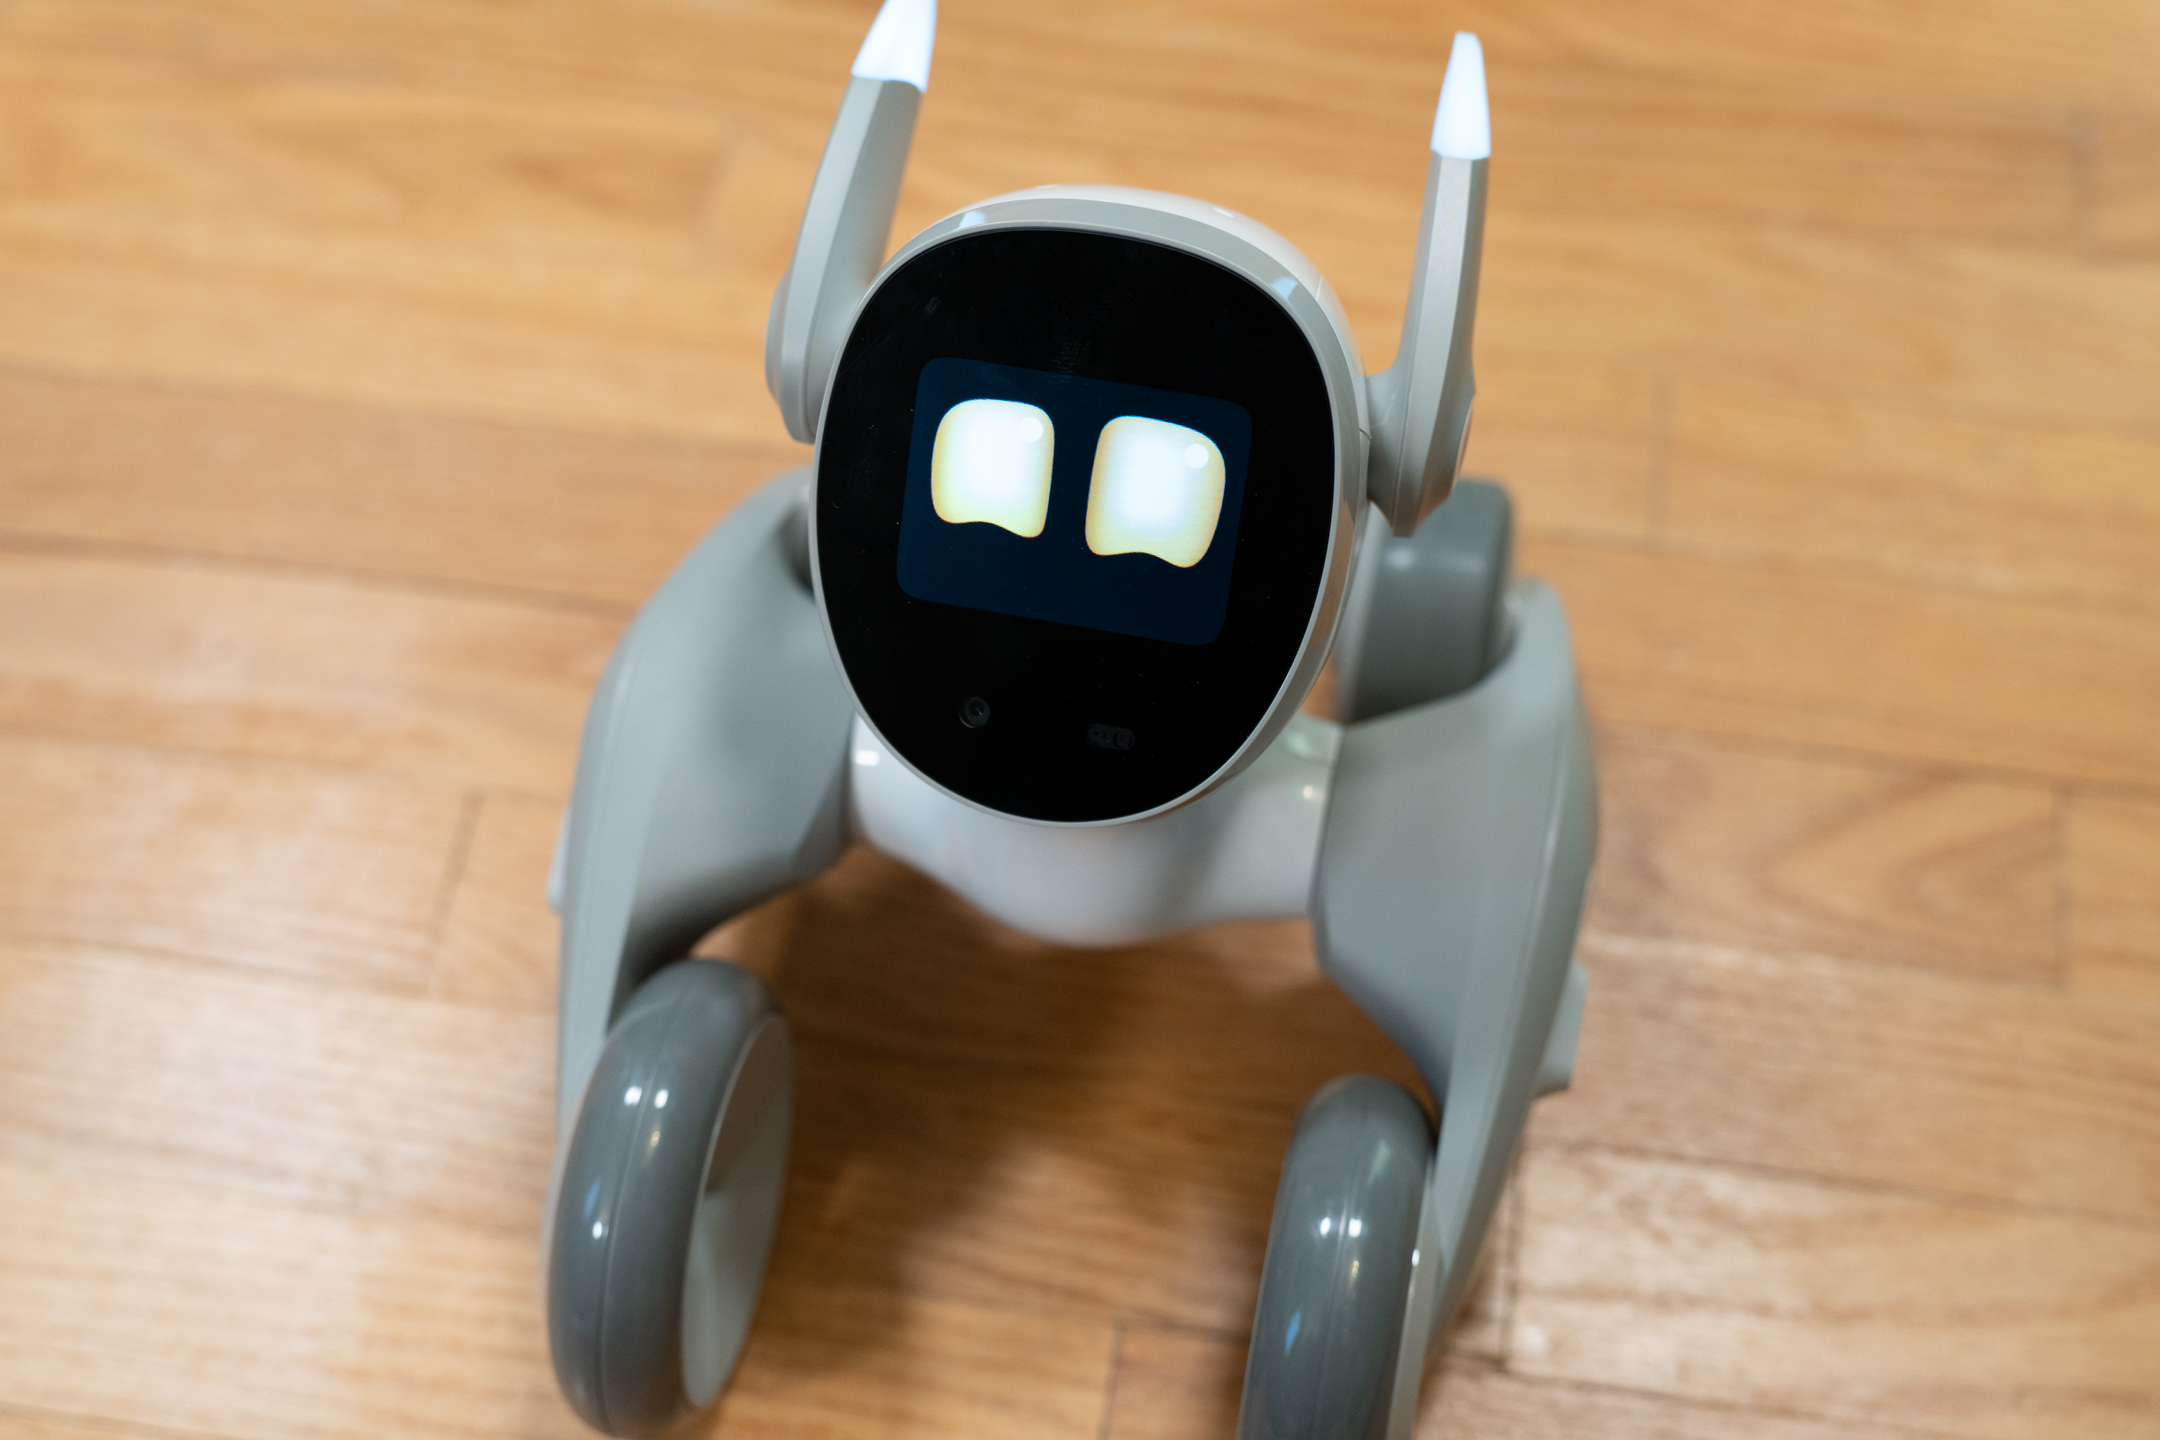 Loona the Petbot